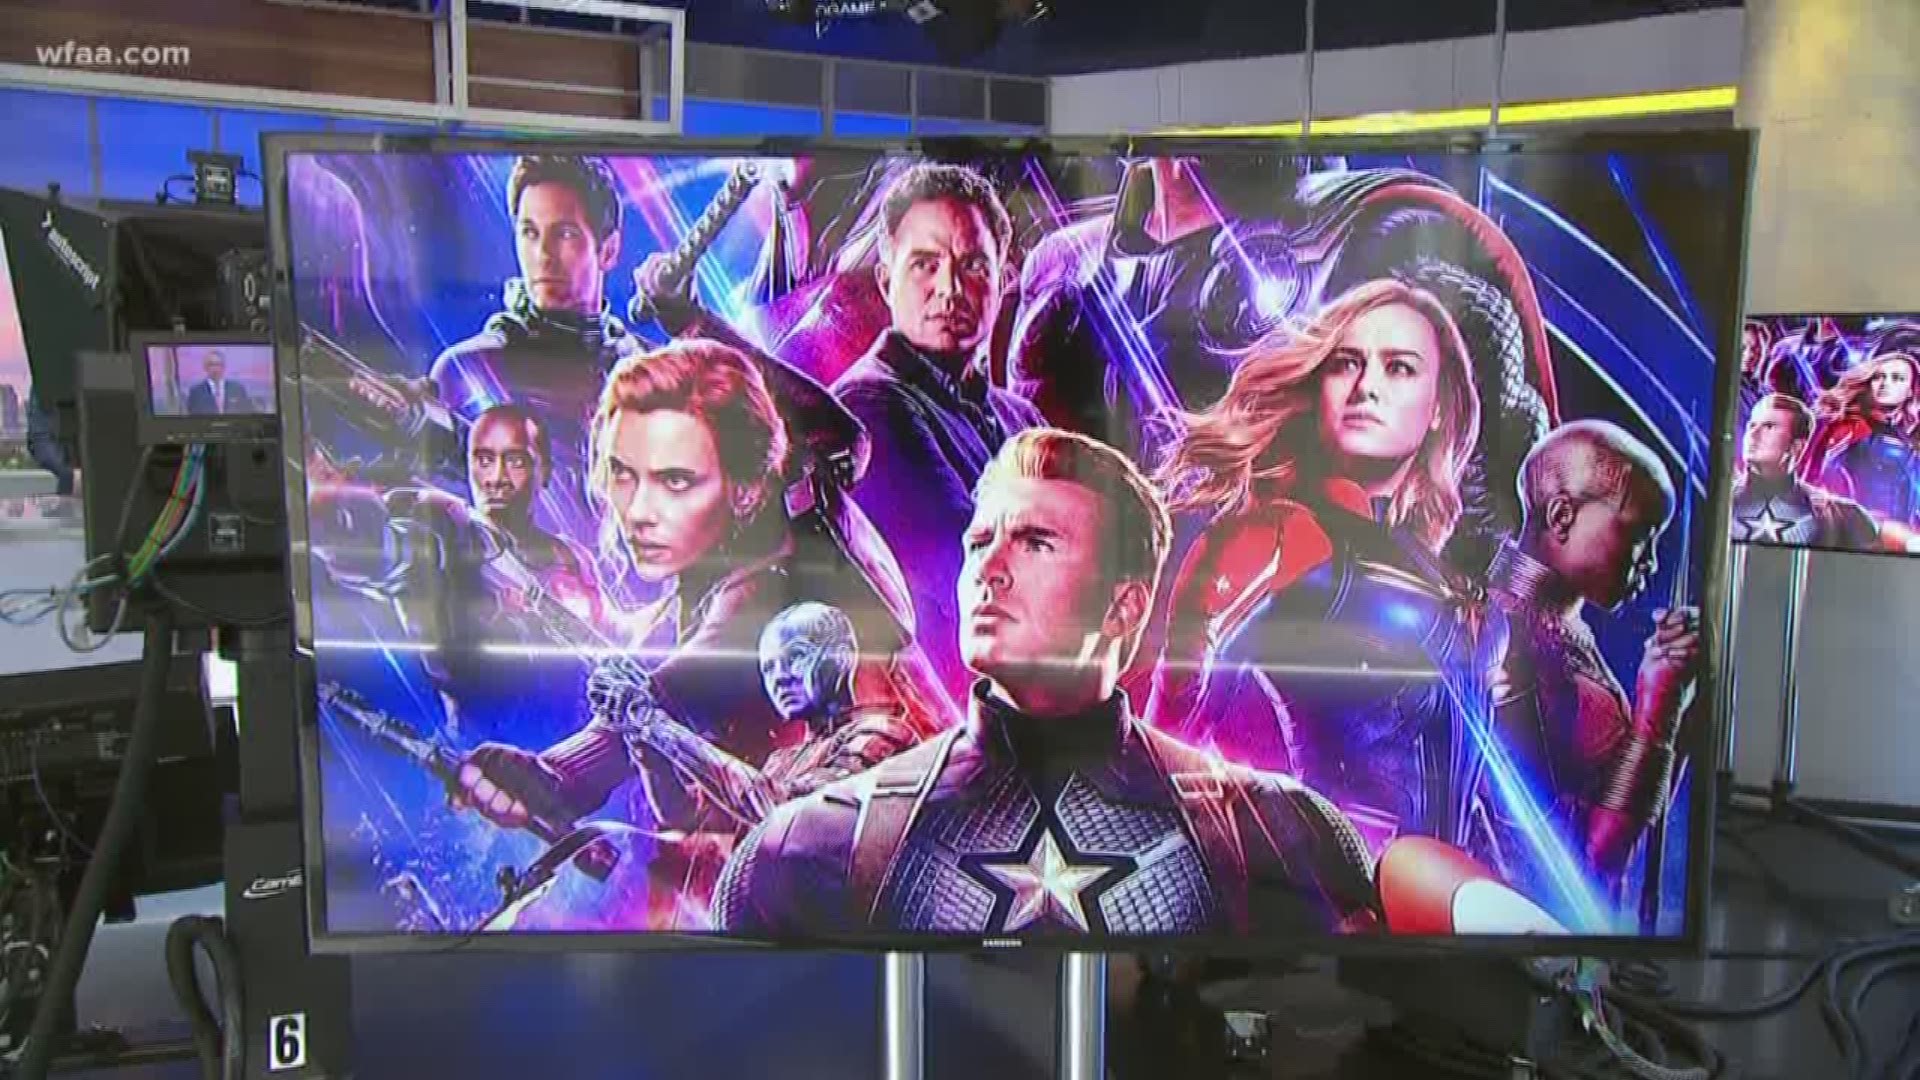 Avengers: Endgame' obliterates records with $1.2B opening